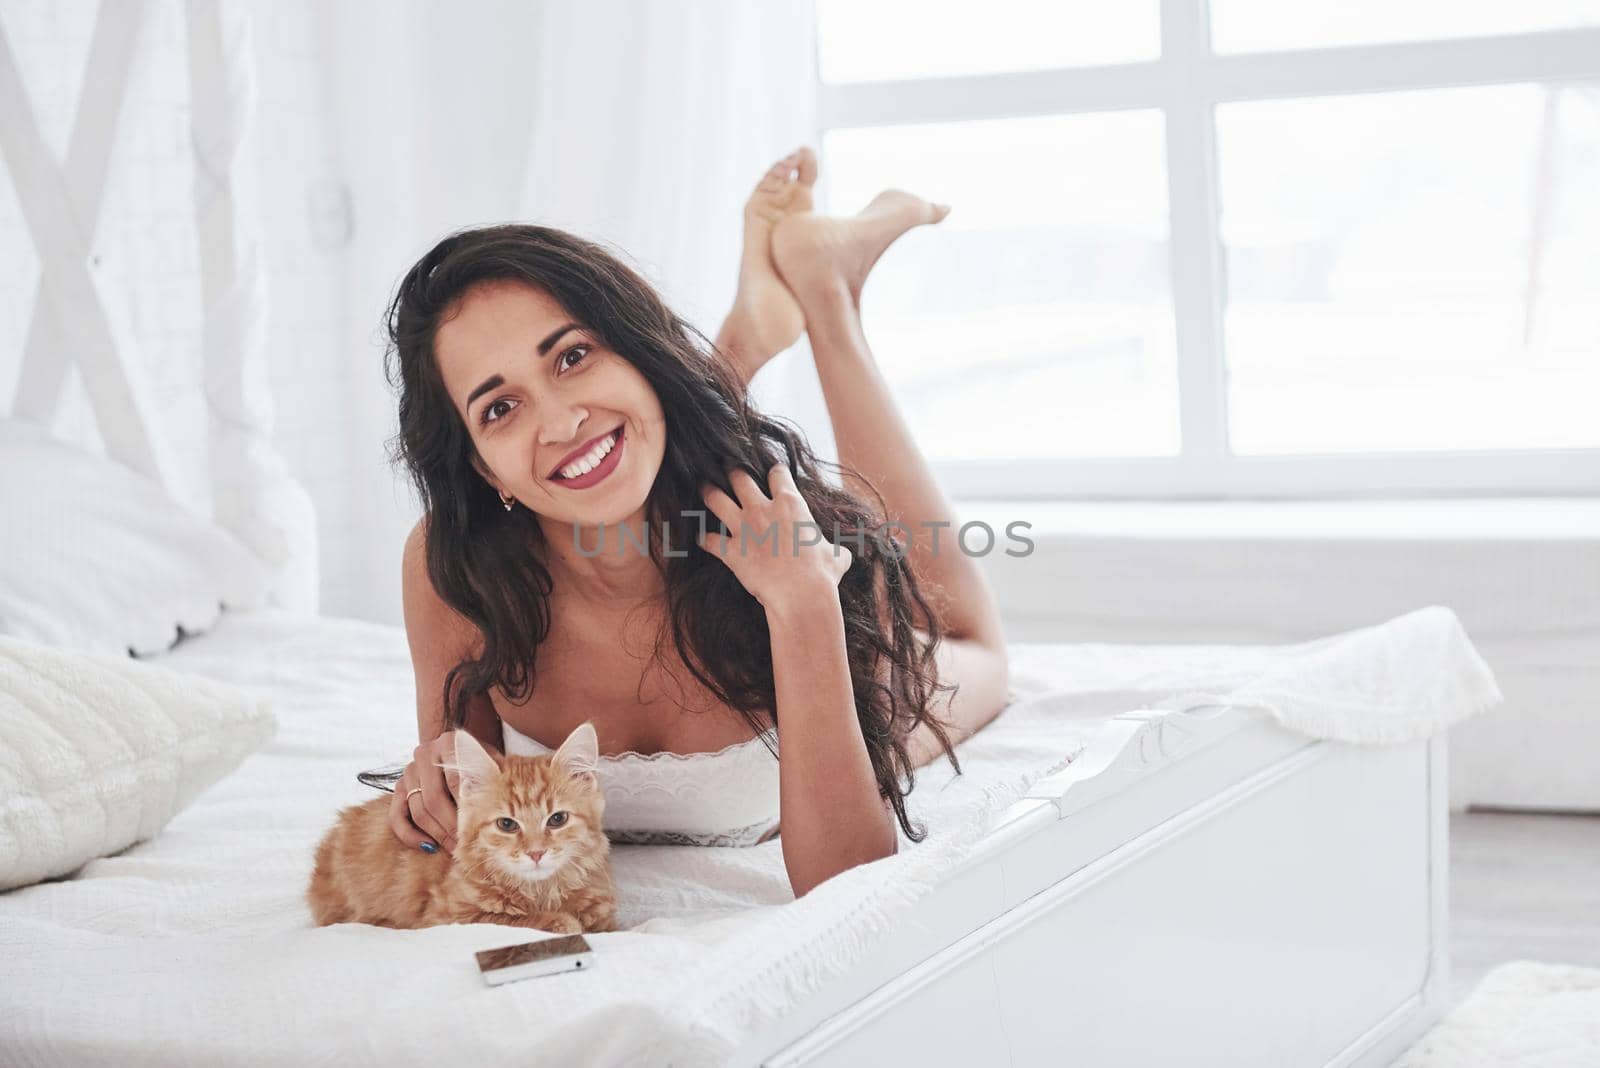 Such a sincere smile. Attractive blonde resting on the white bed with her cute kitten.